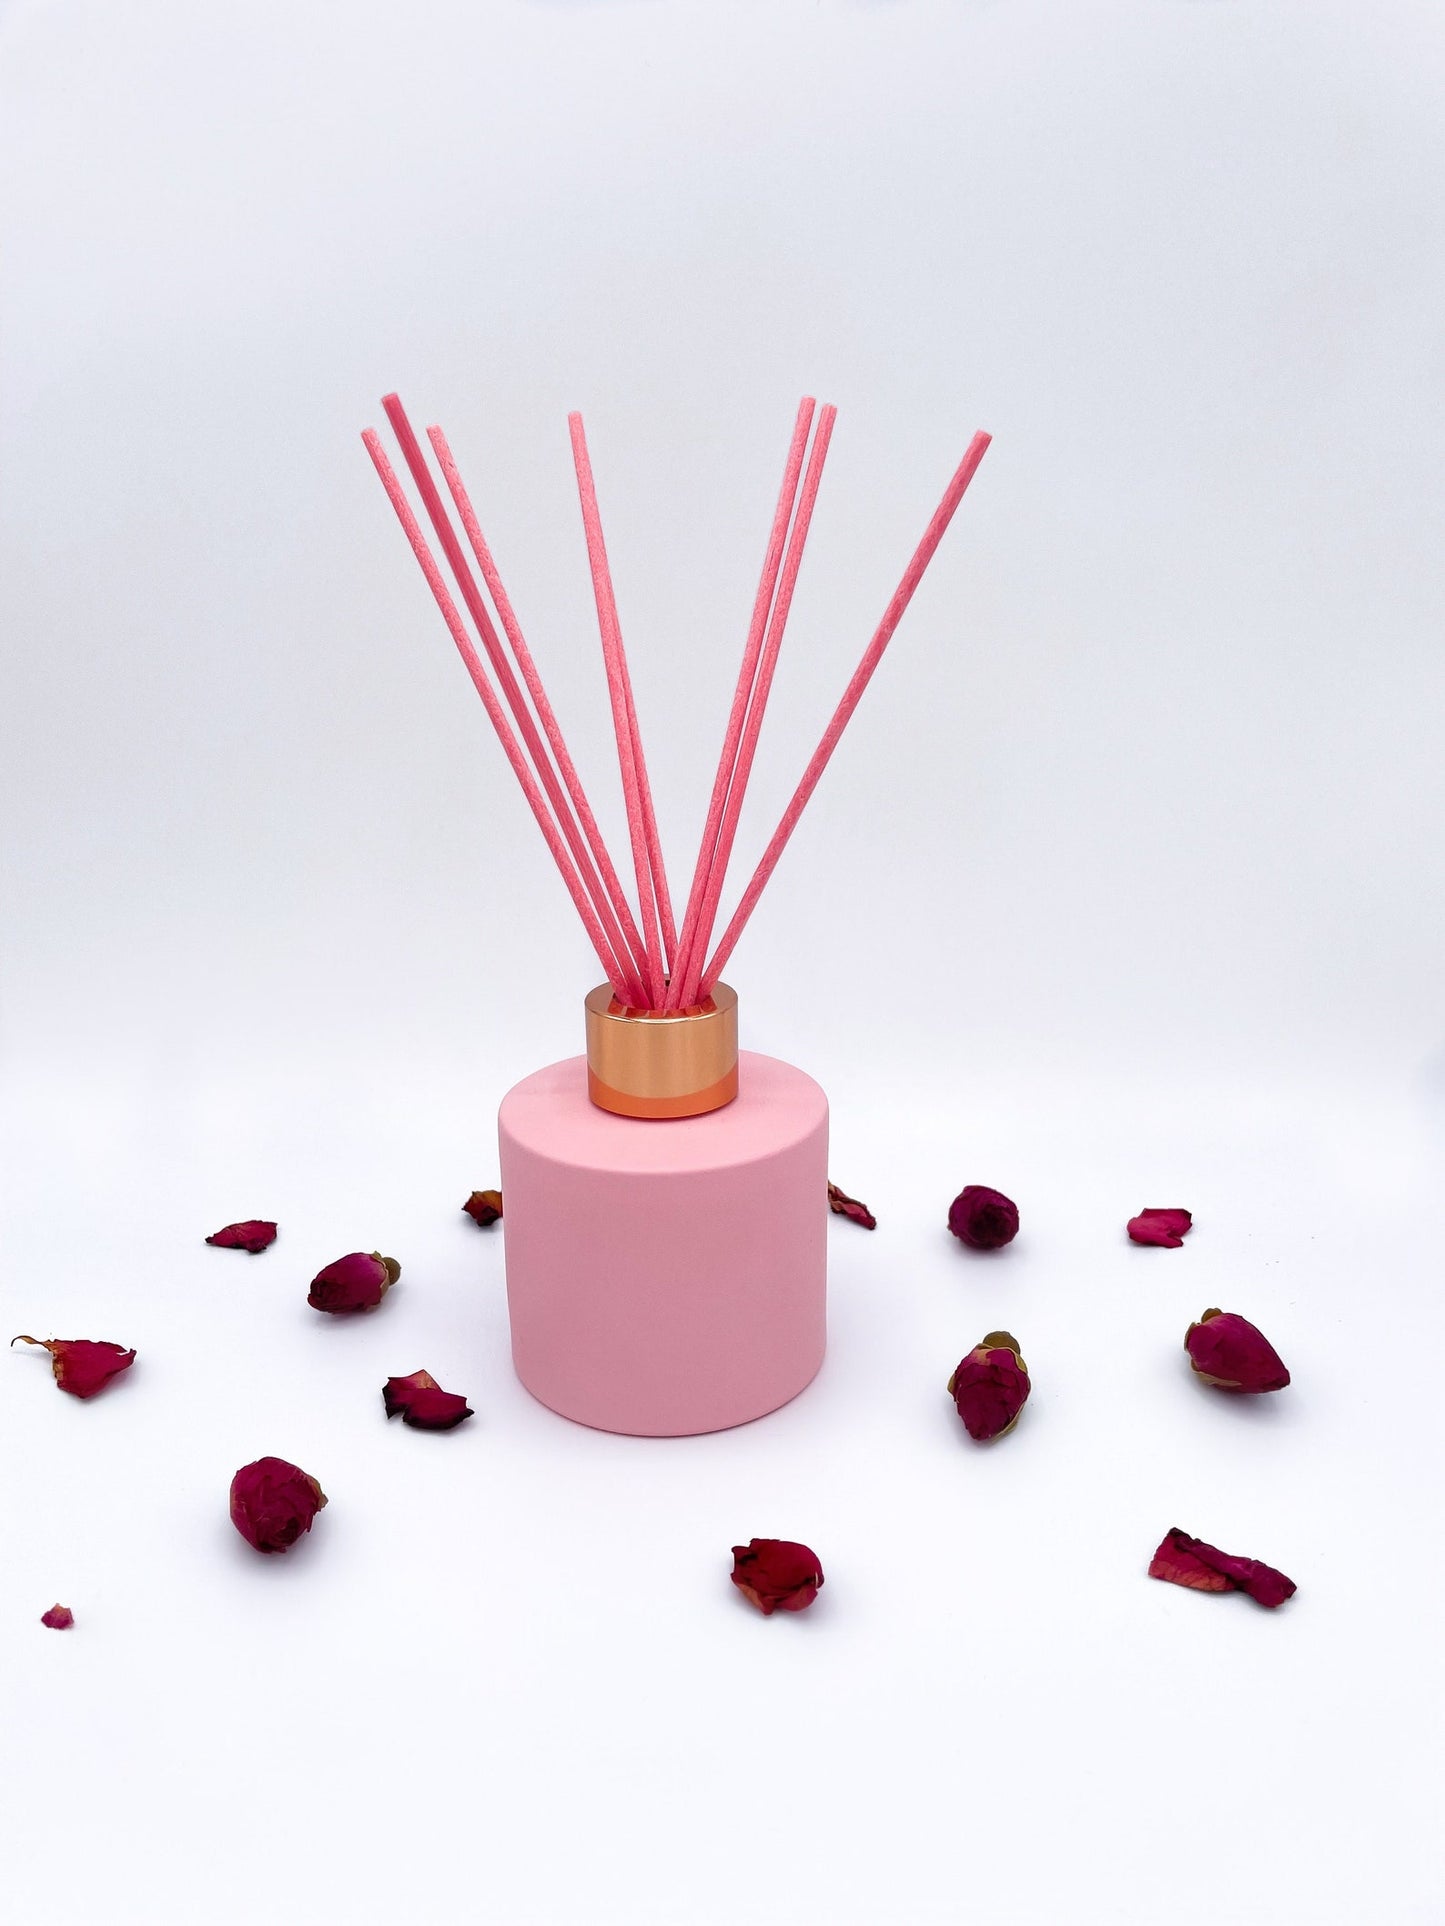 Pink reed diffuser